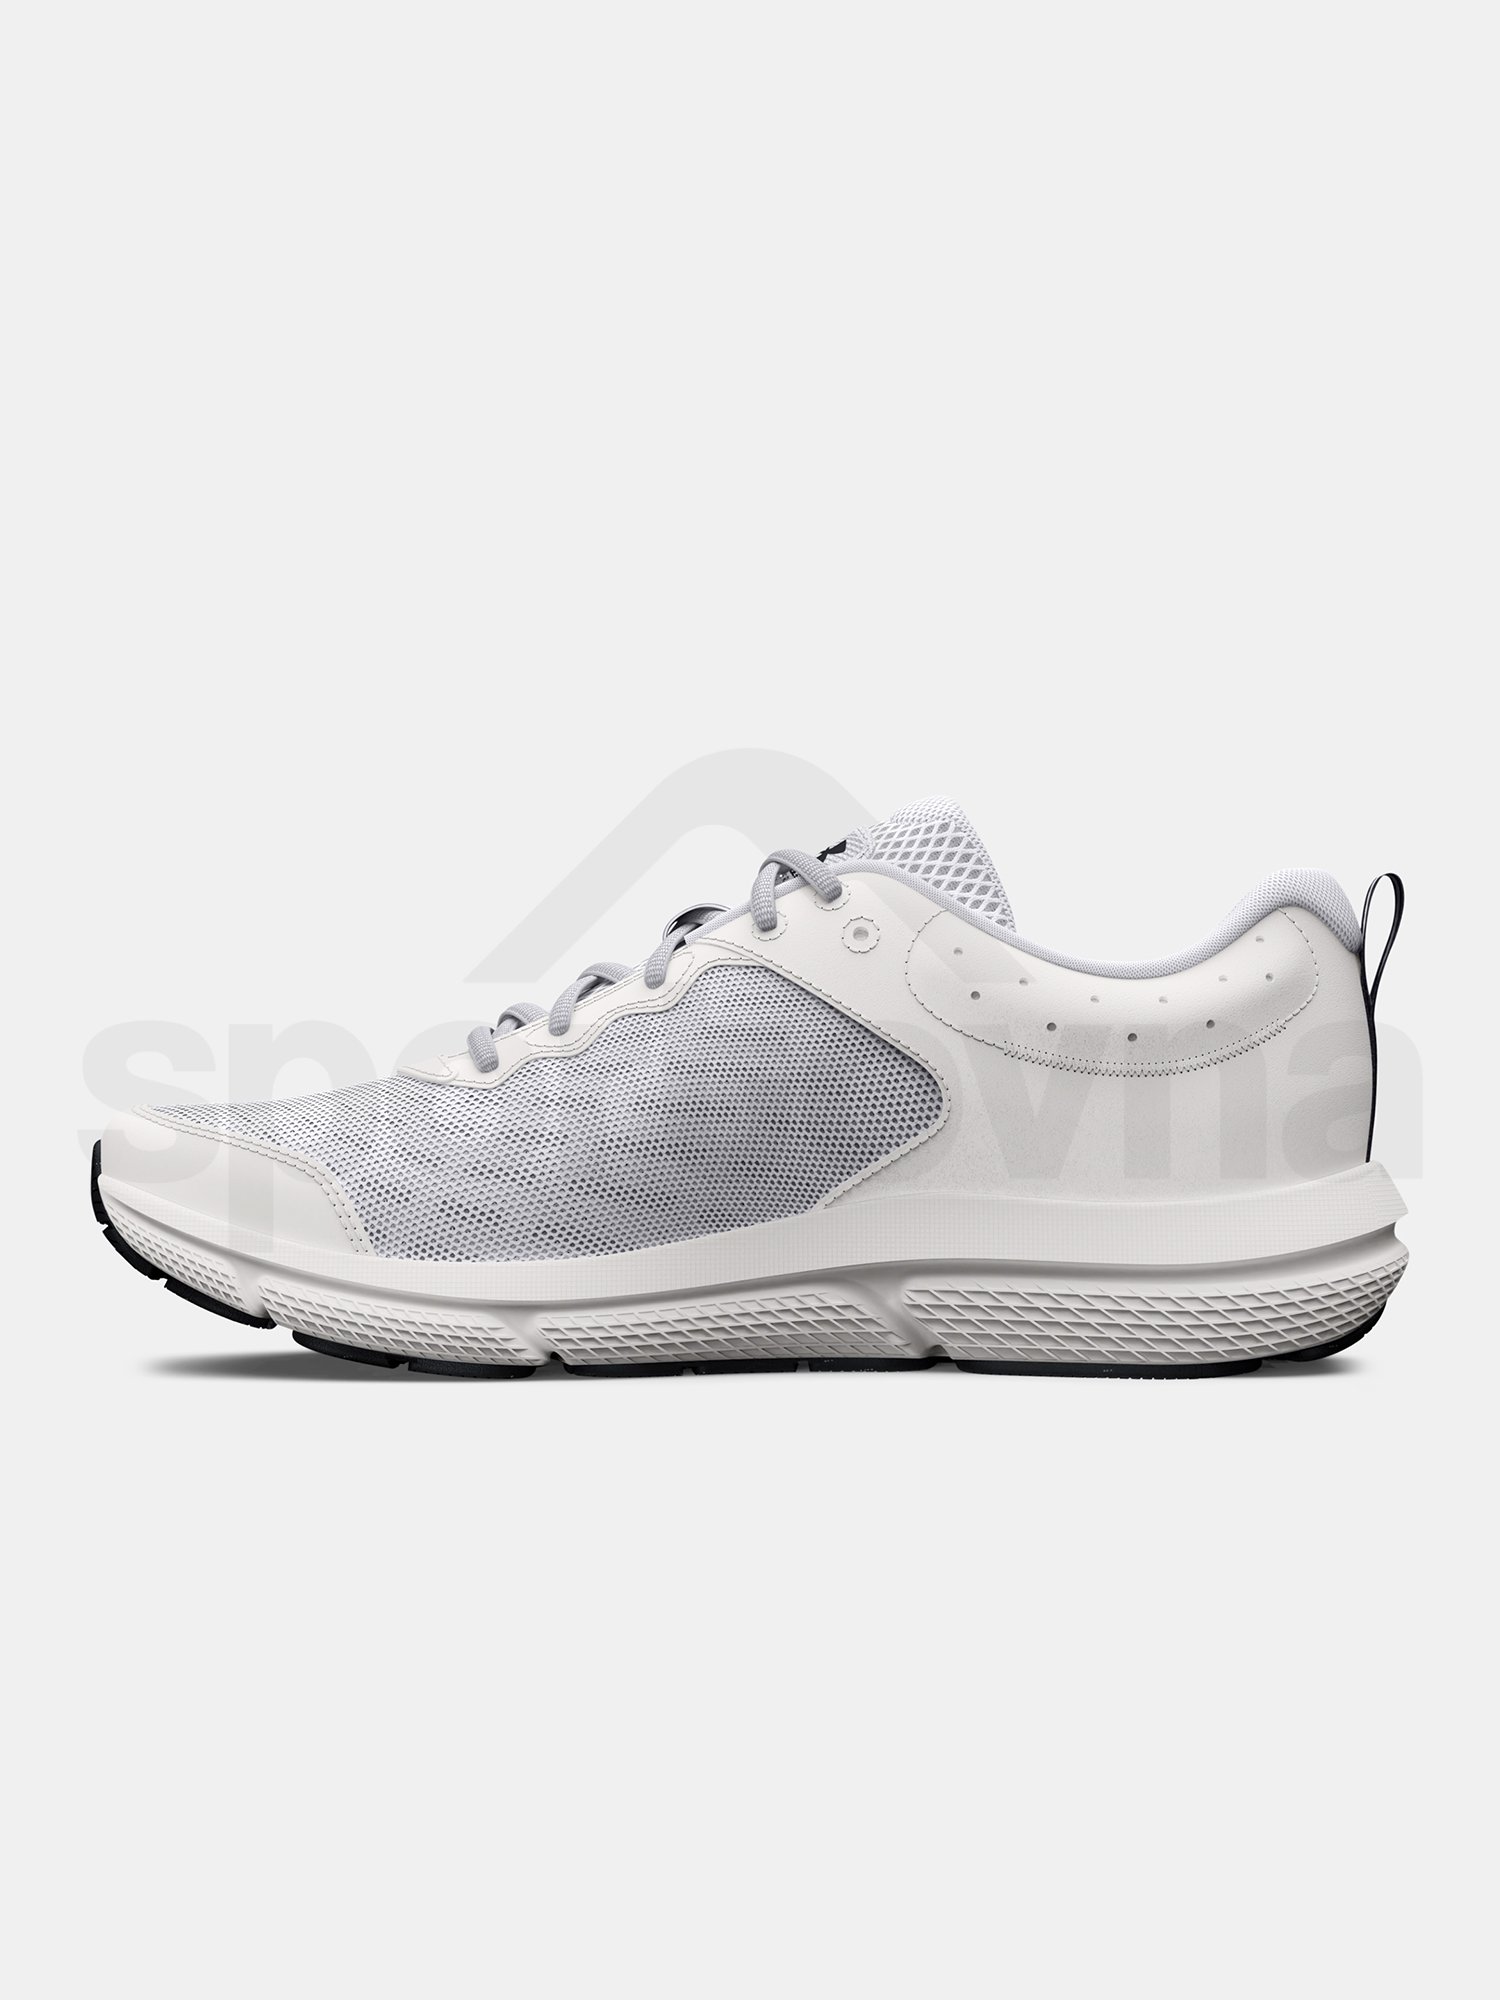 Boty Under Armour UA Charged Assert 10-WHT